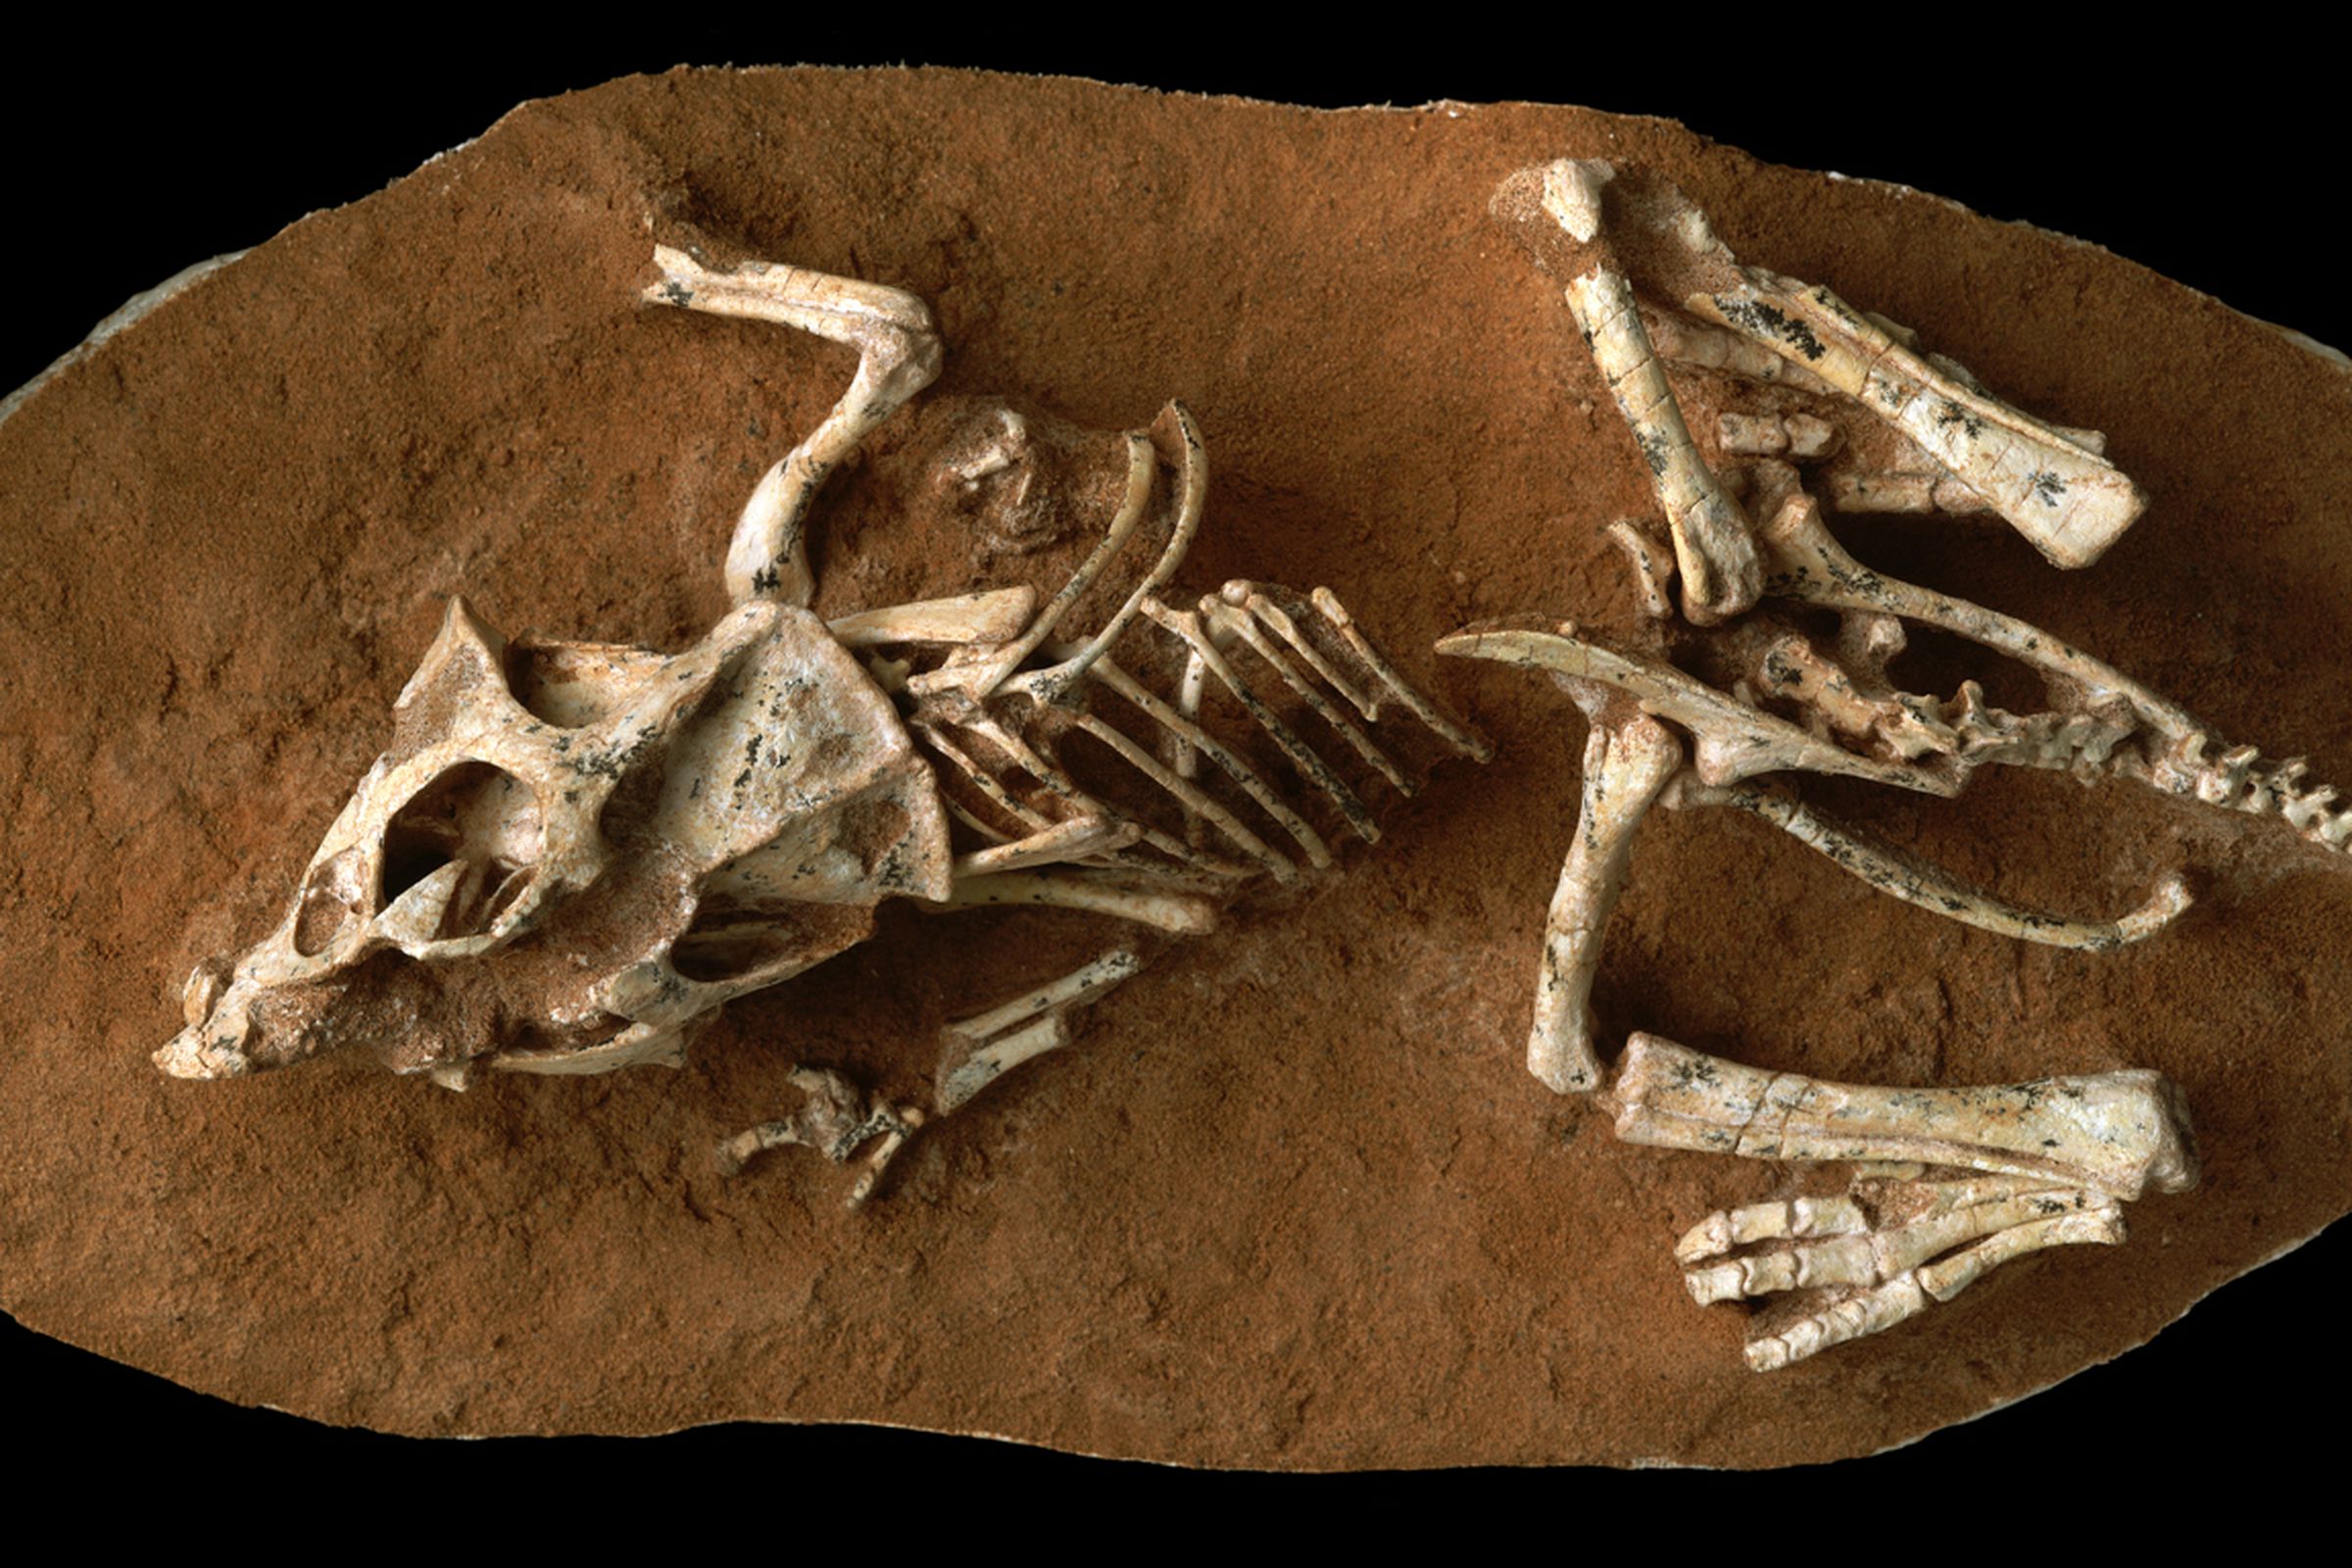 A hatchling Protoceratops andrewsi fossil from Mongolia